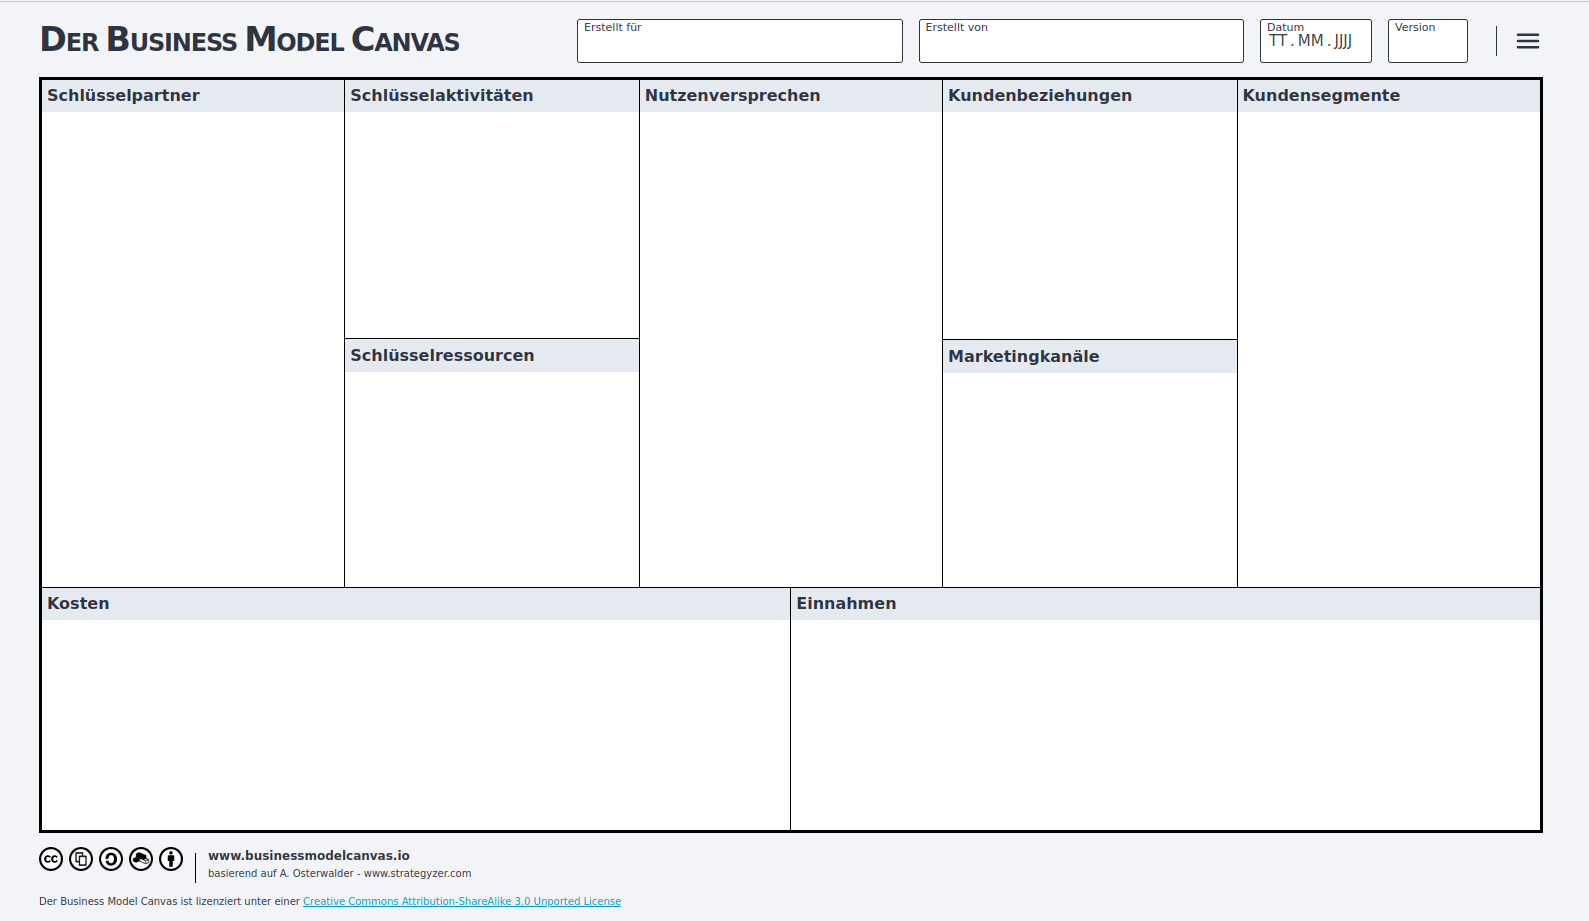 Image of the Business Model Canvas Grid